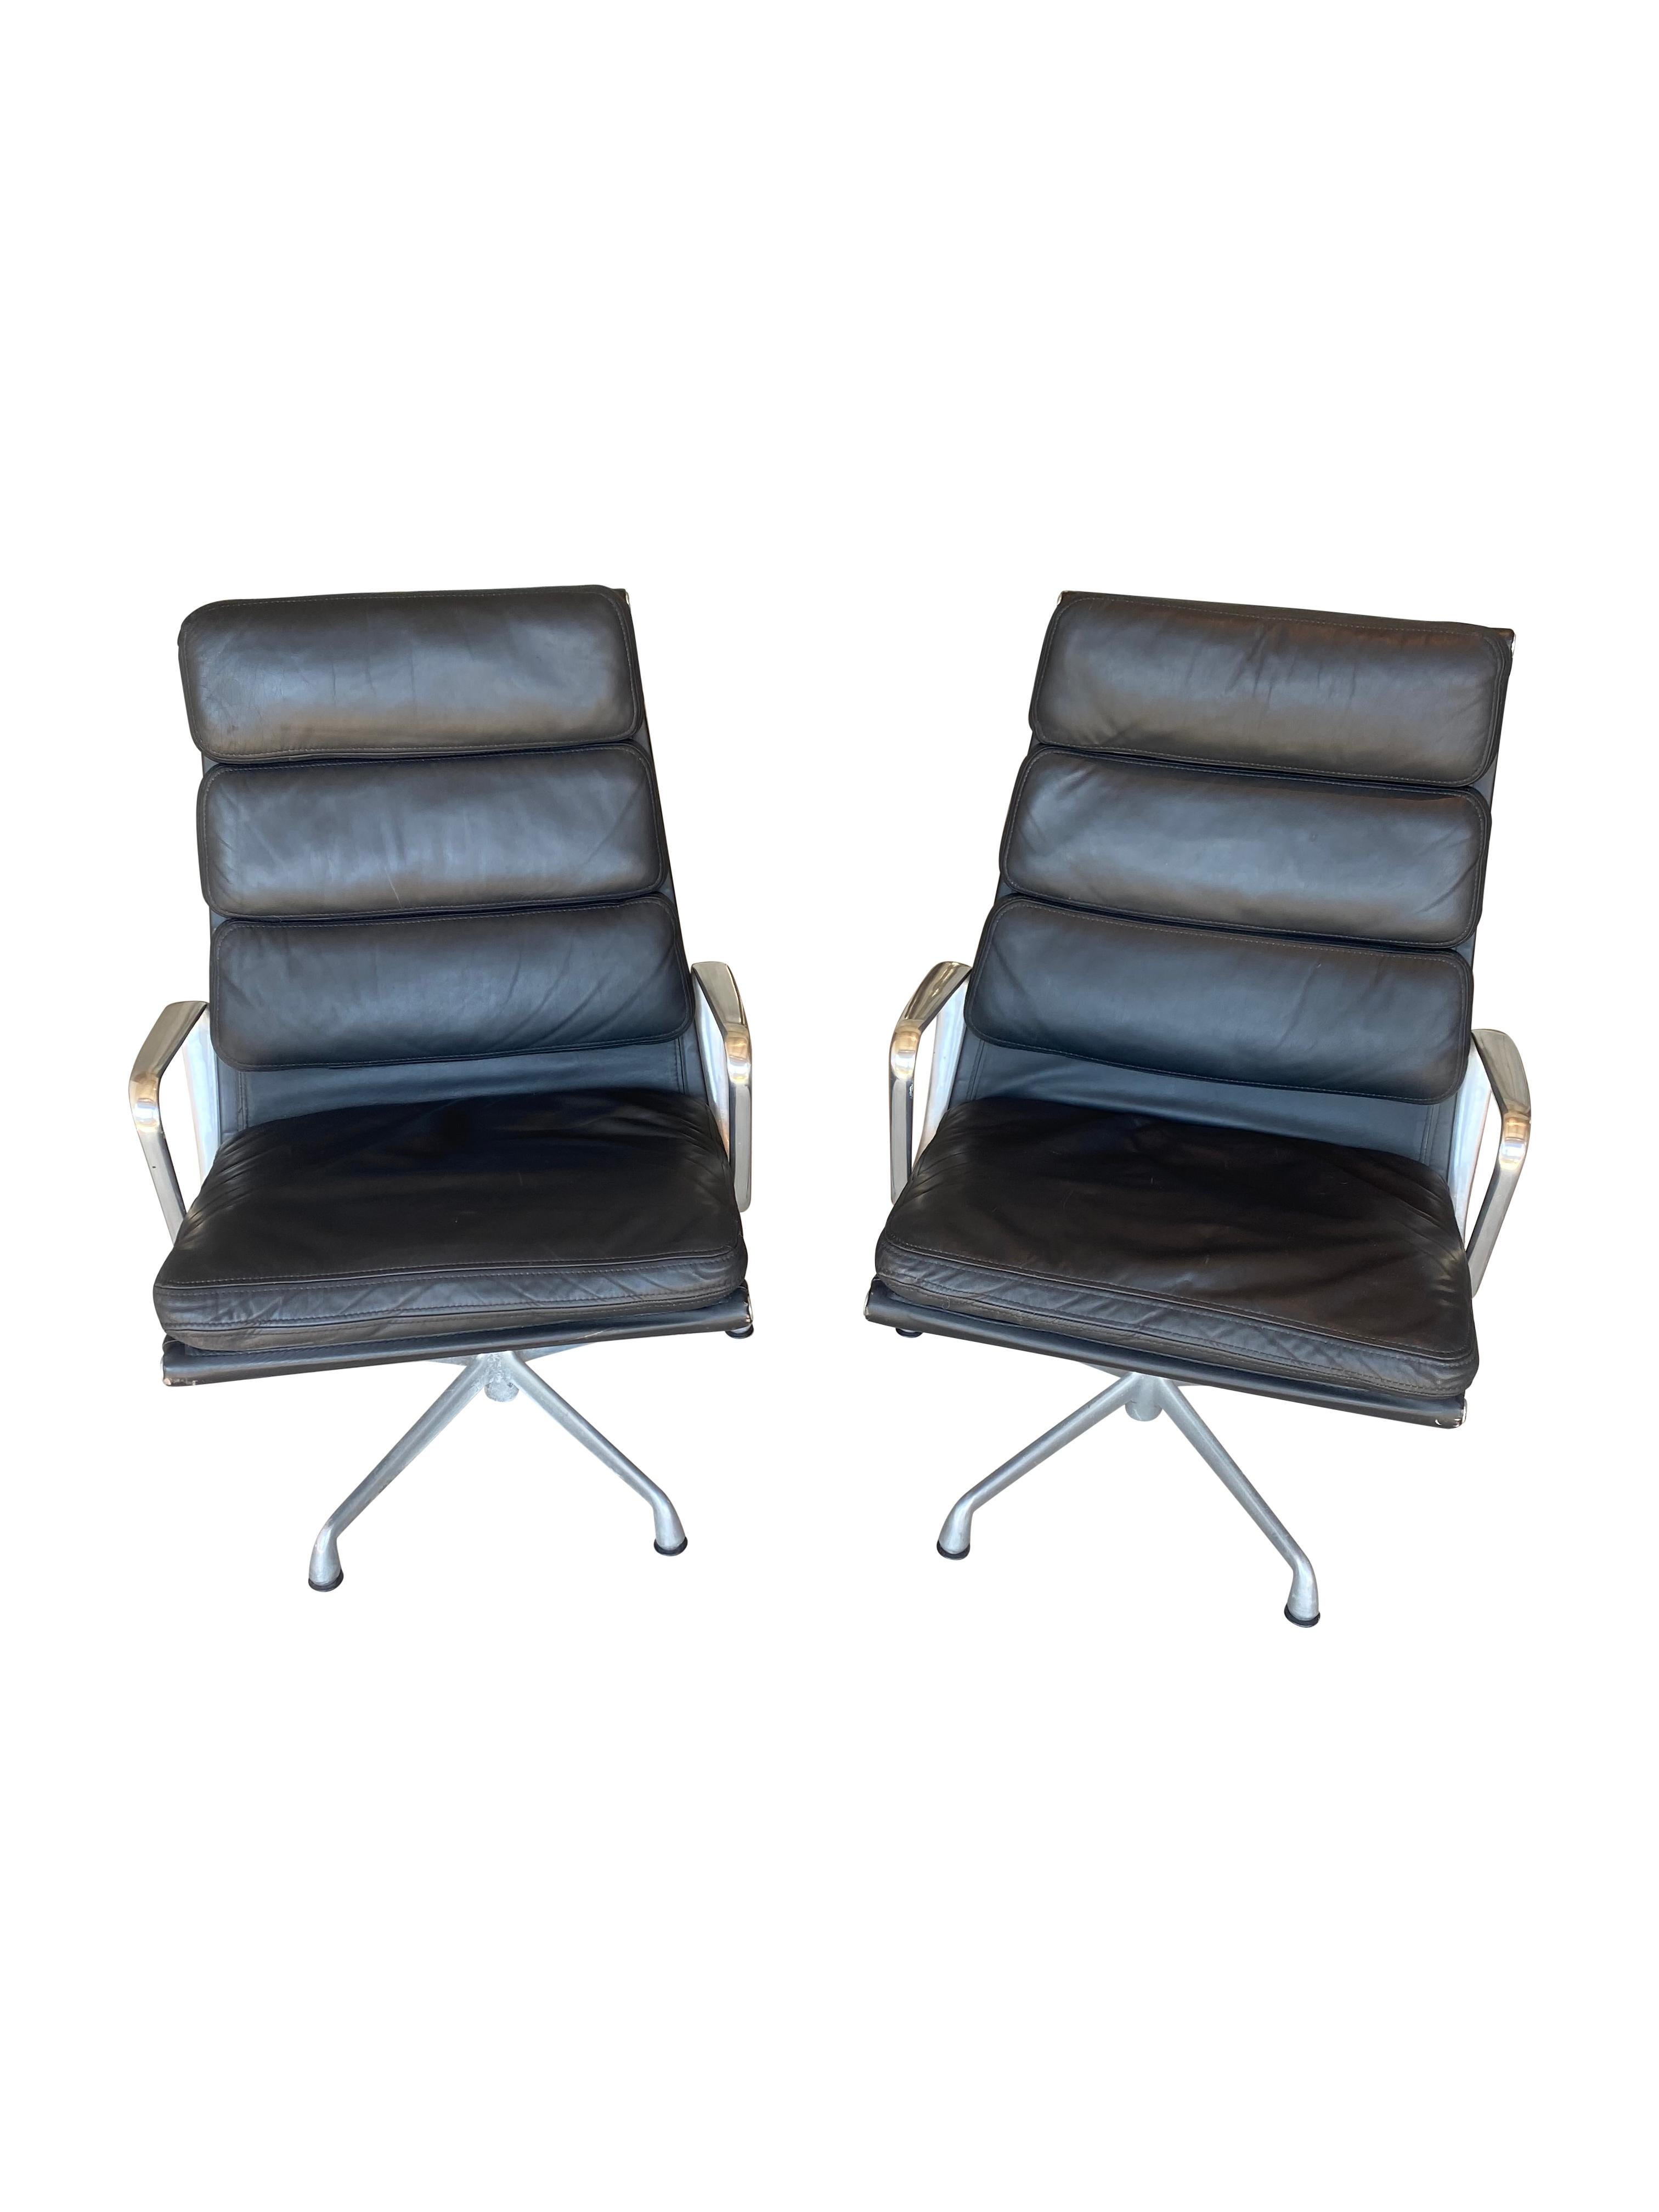 Pair of Eames soft pad aluminum group lounge chairs. Executed in polished aluminum and soft black leather. In excellent original condition. All parts present. Stamped Herman Miller into frame. Even color and condition. Bases retain all nylon foot